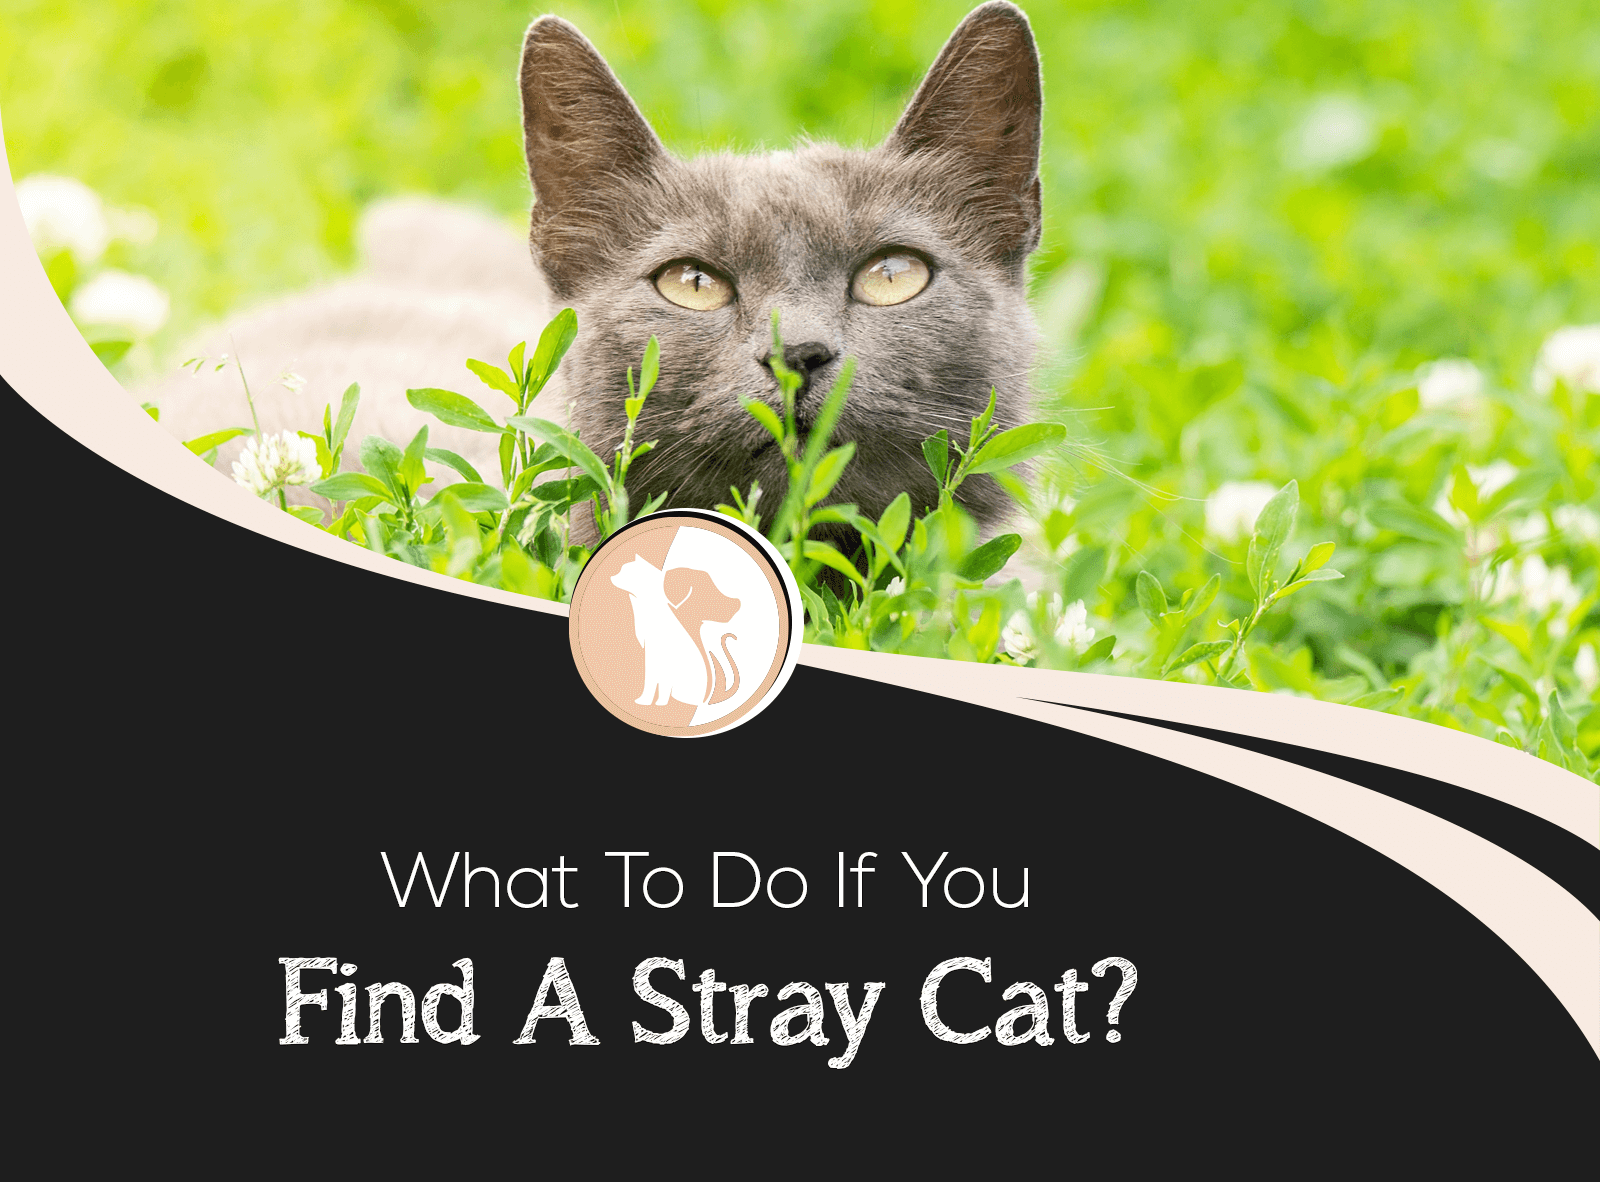 What to Do If You Find a Stray Cat